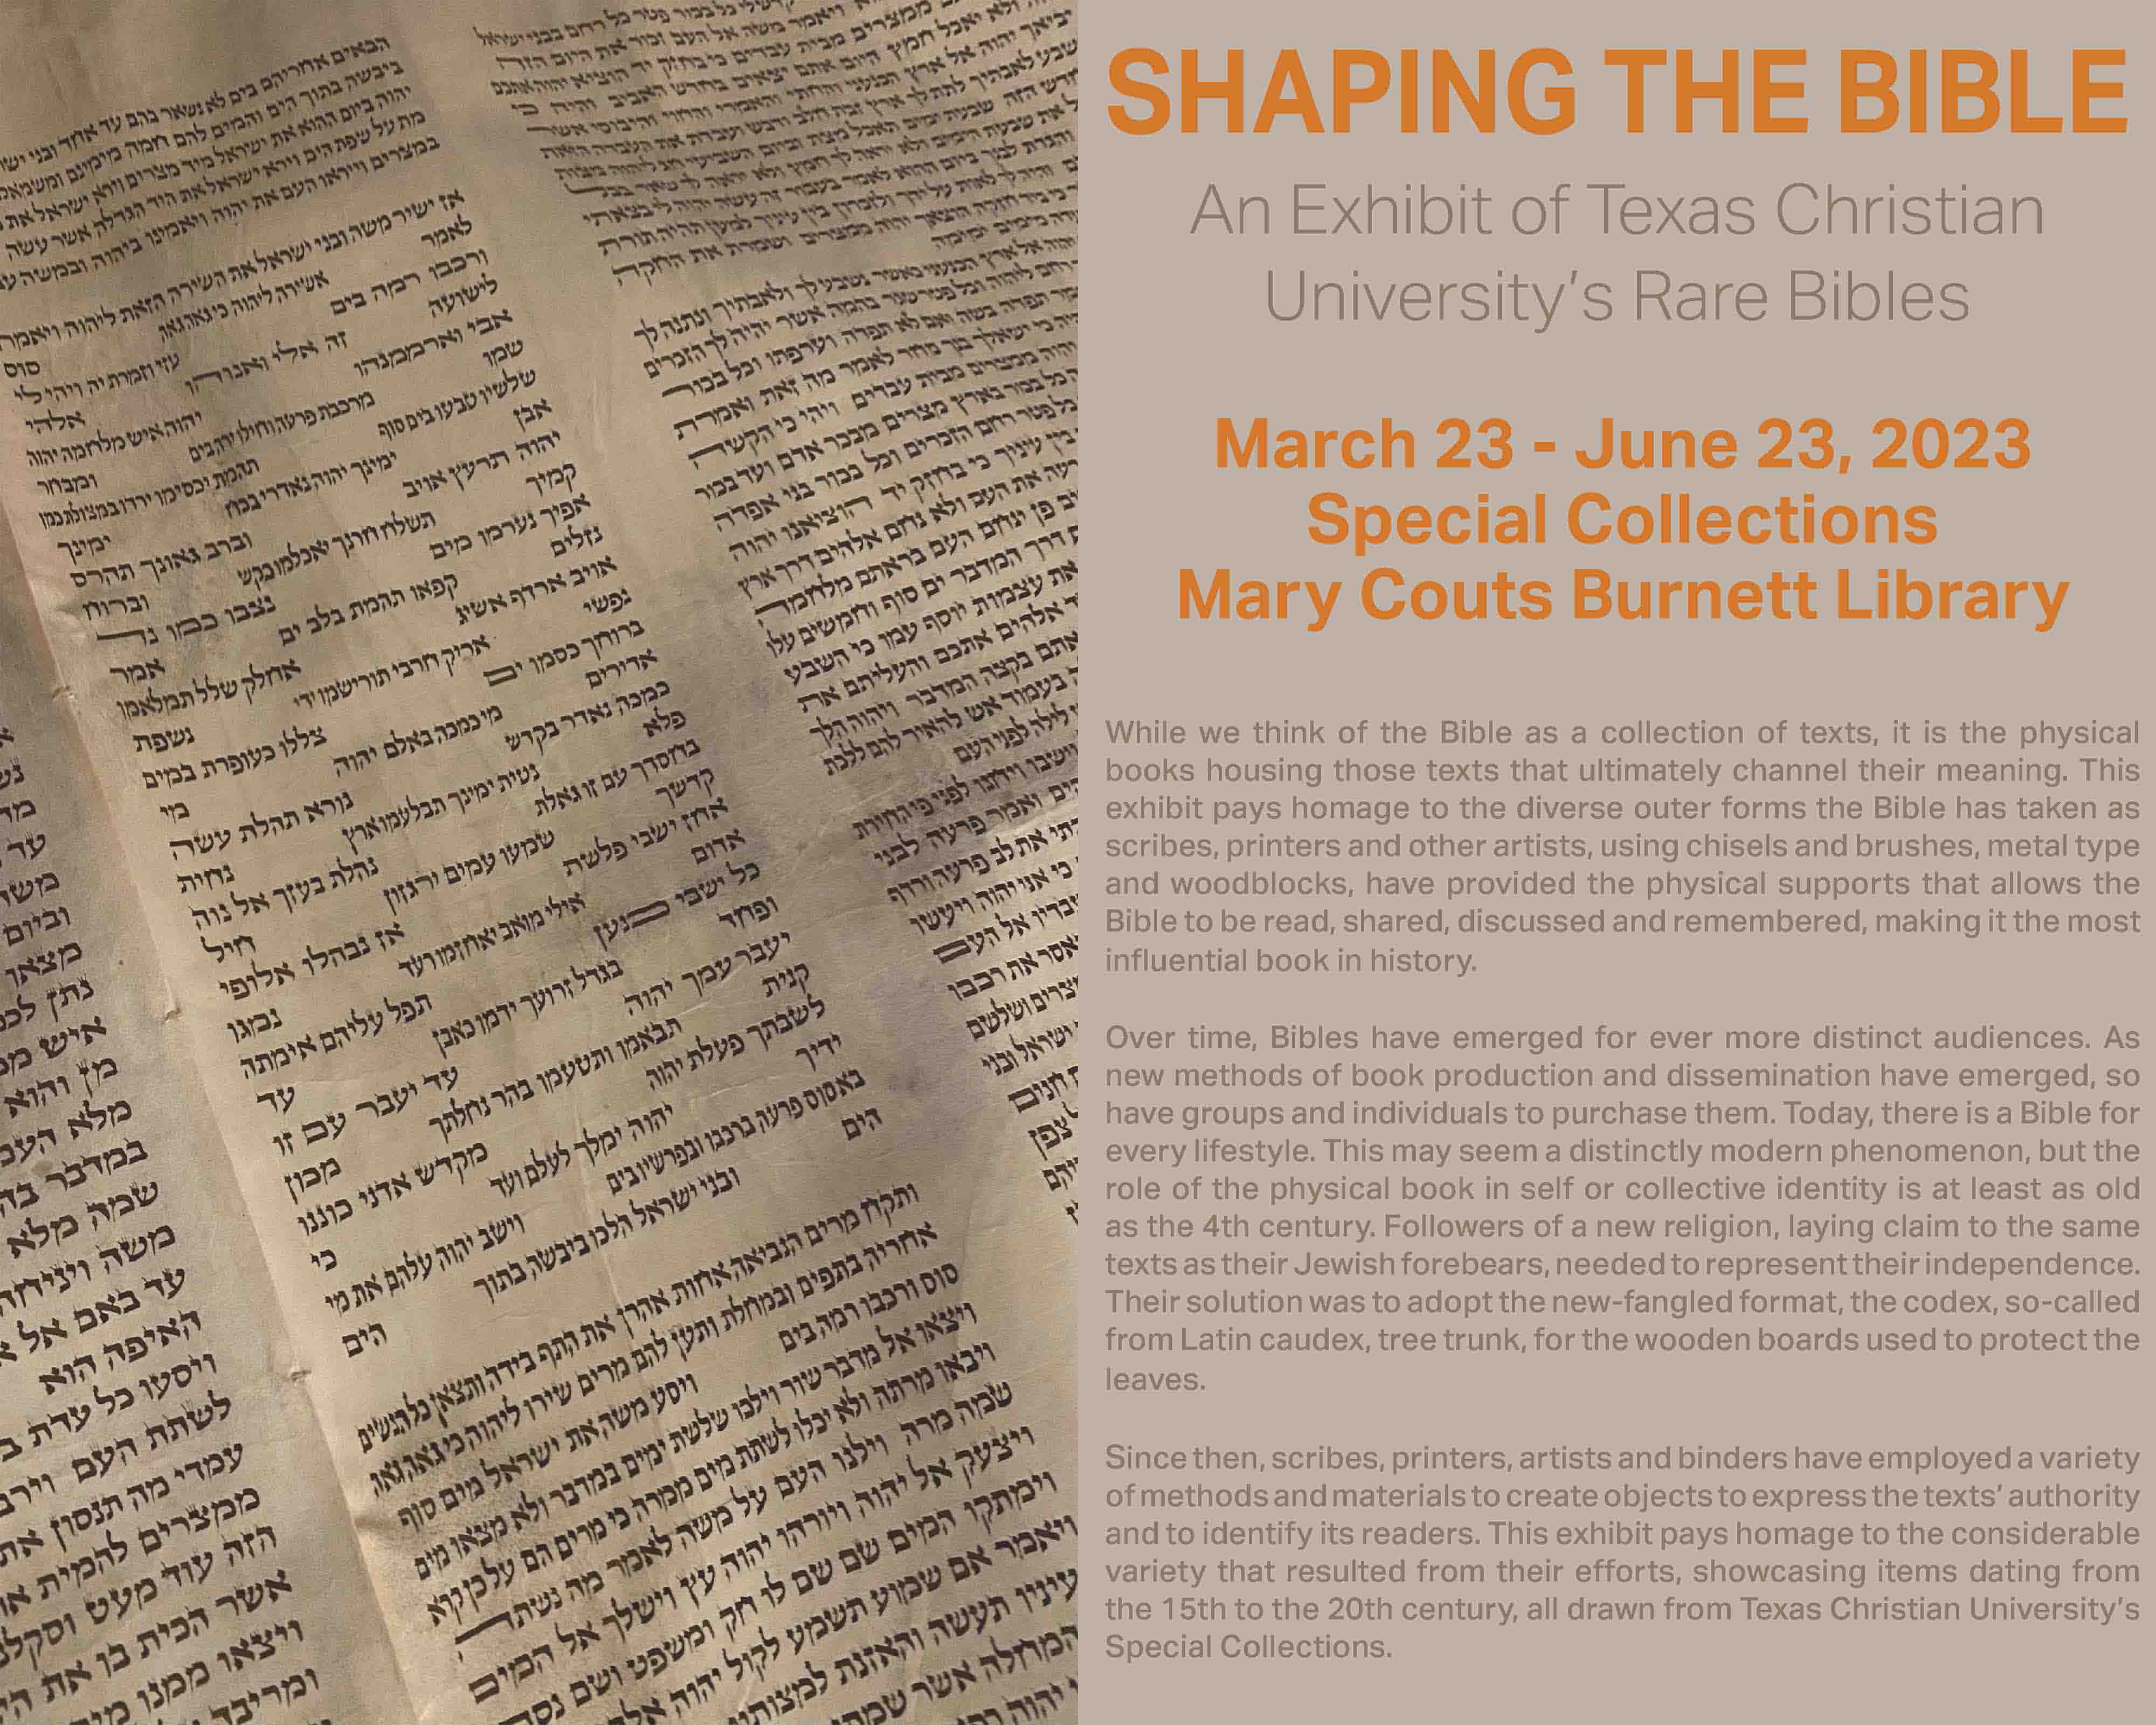 Shaping the Bible Exhibit March 23-June 23, 2023